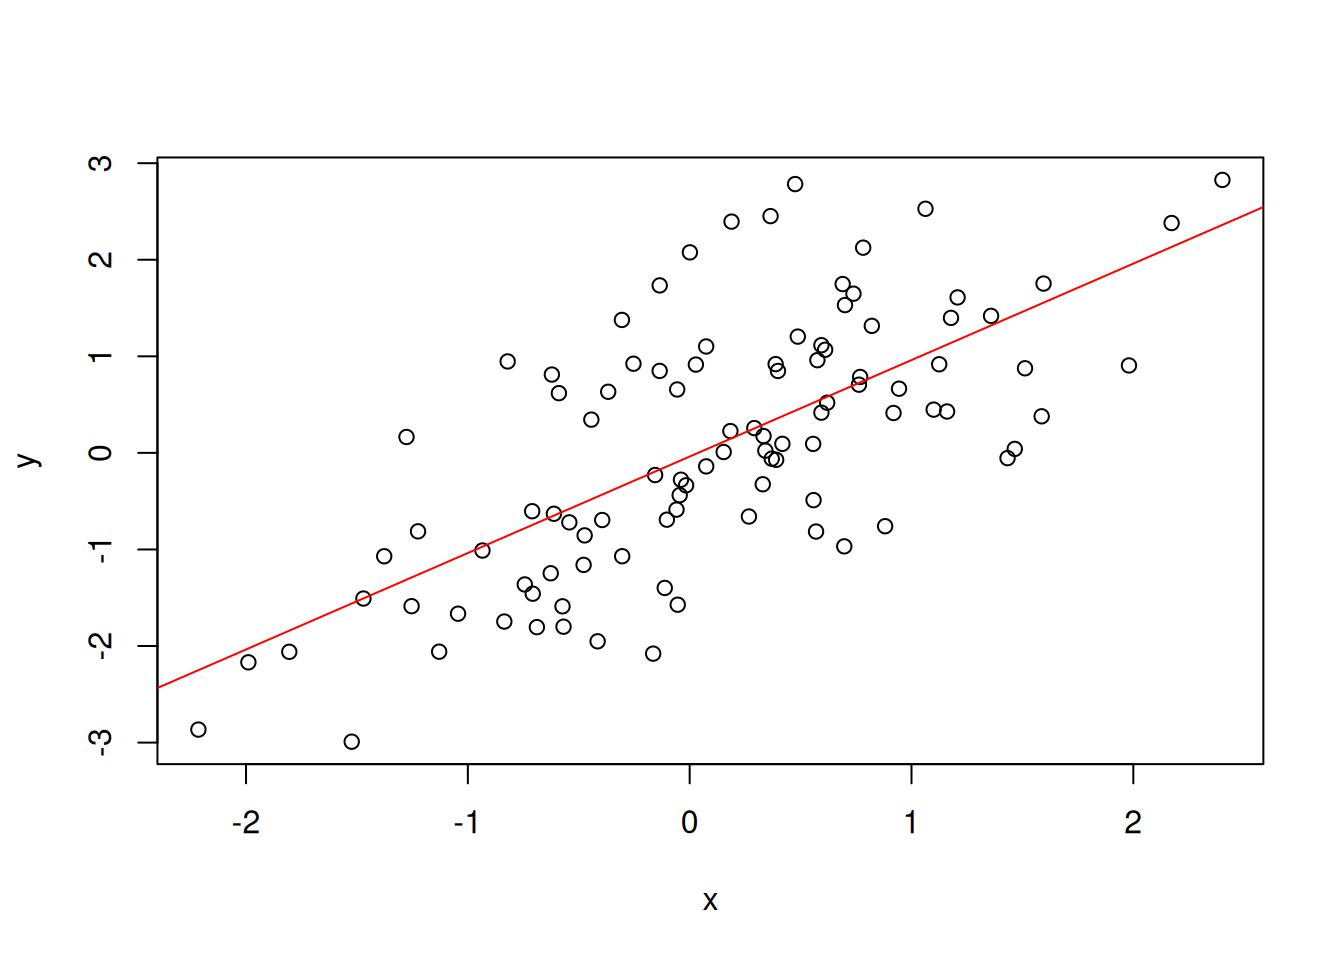 The regression line modelling the linear regression between the two `x` and `y` variables.